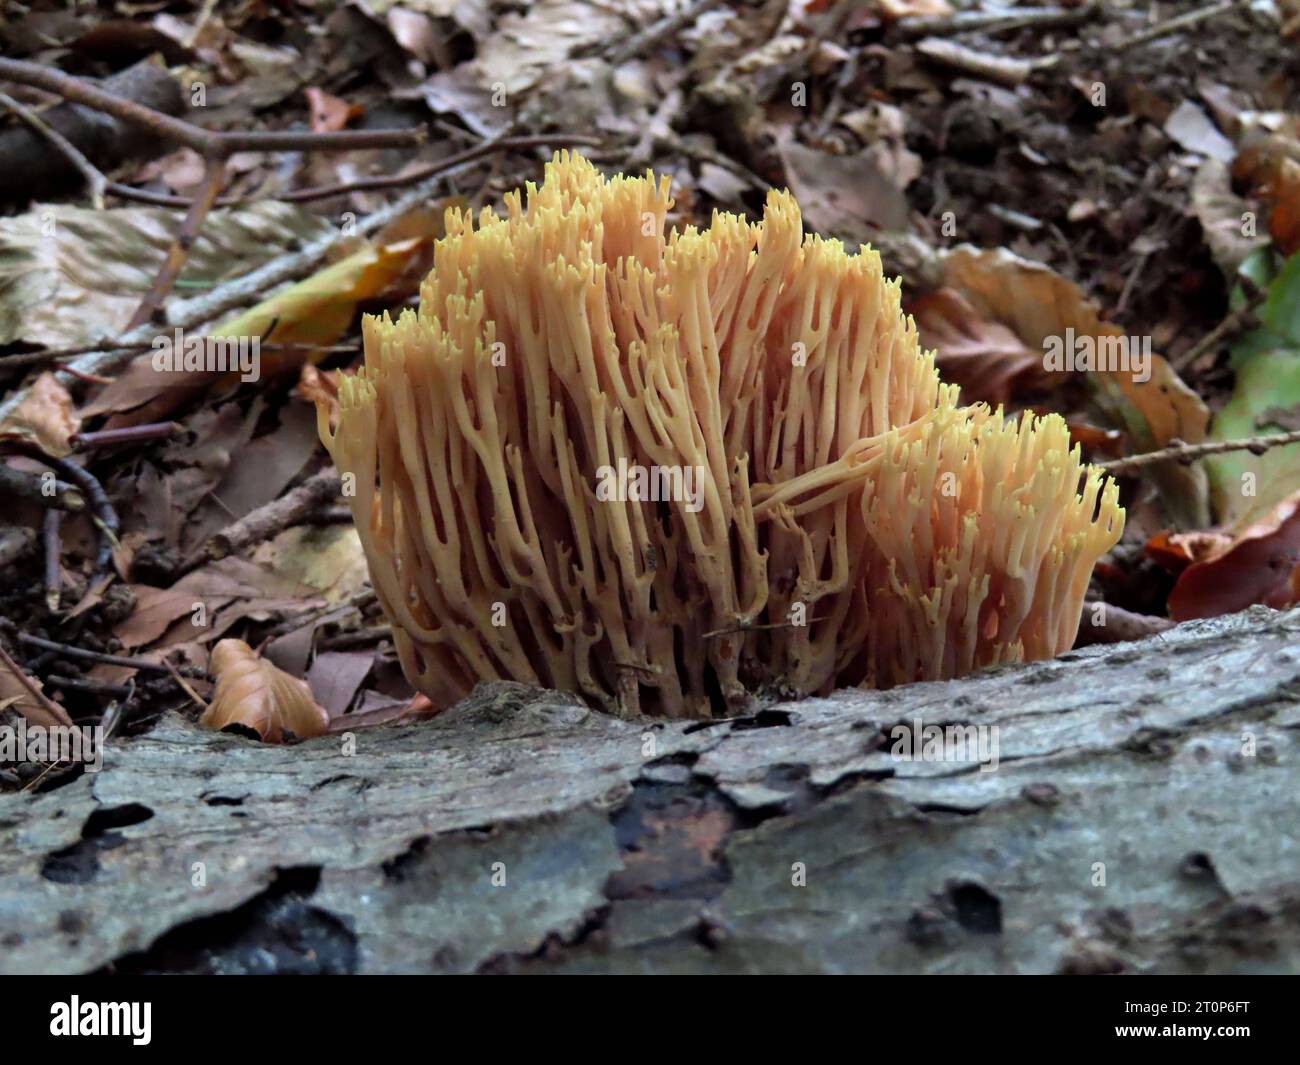 Blick auf die Rueckseite der Steife Koralle mit ihren Aestelungen Steife Koralle Rueckseite *** View of the back side of the Stiff Coral with its aestelas Stiff Coral back side Credit: Imago/Alamy Live News Stock Photo